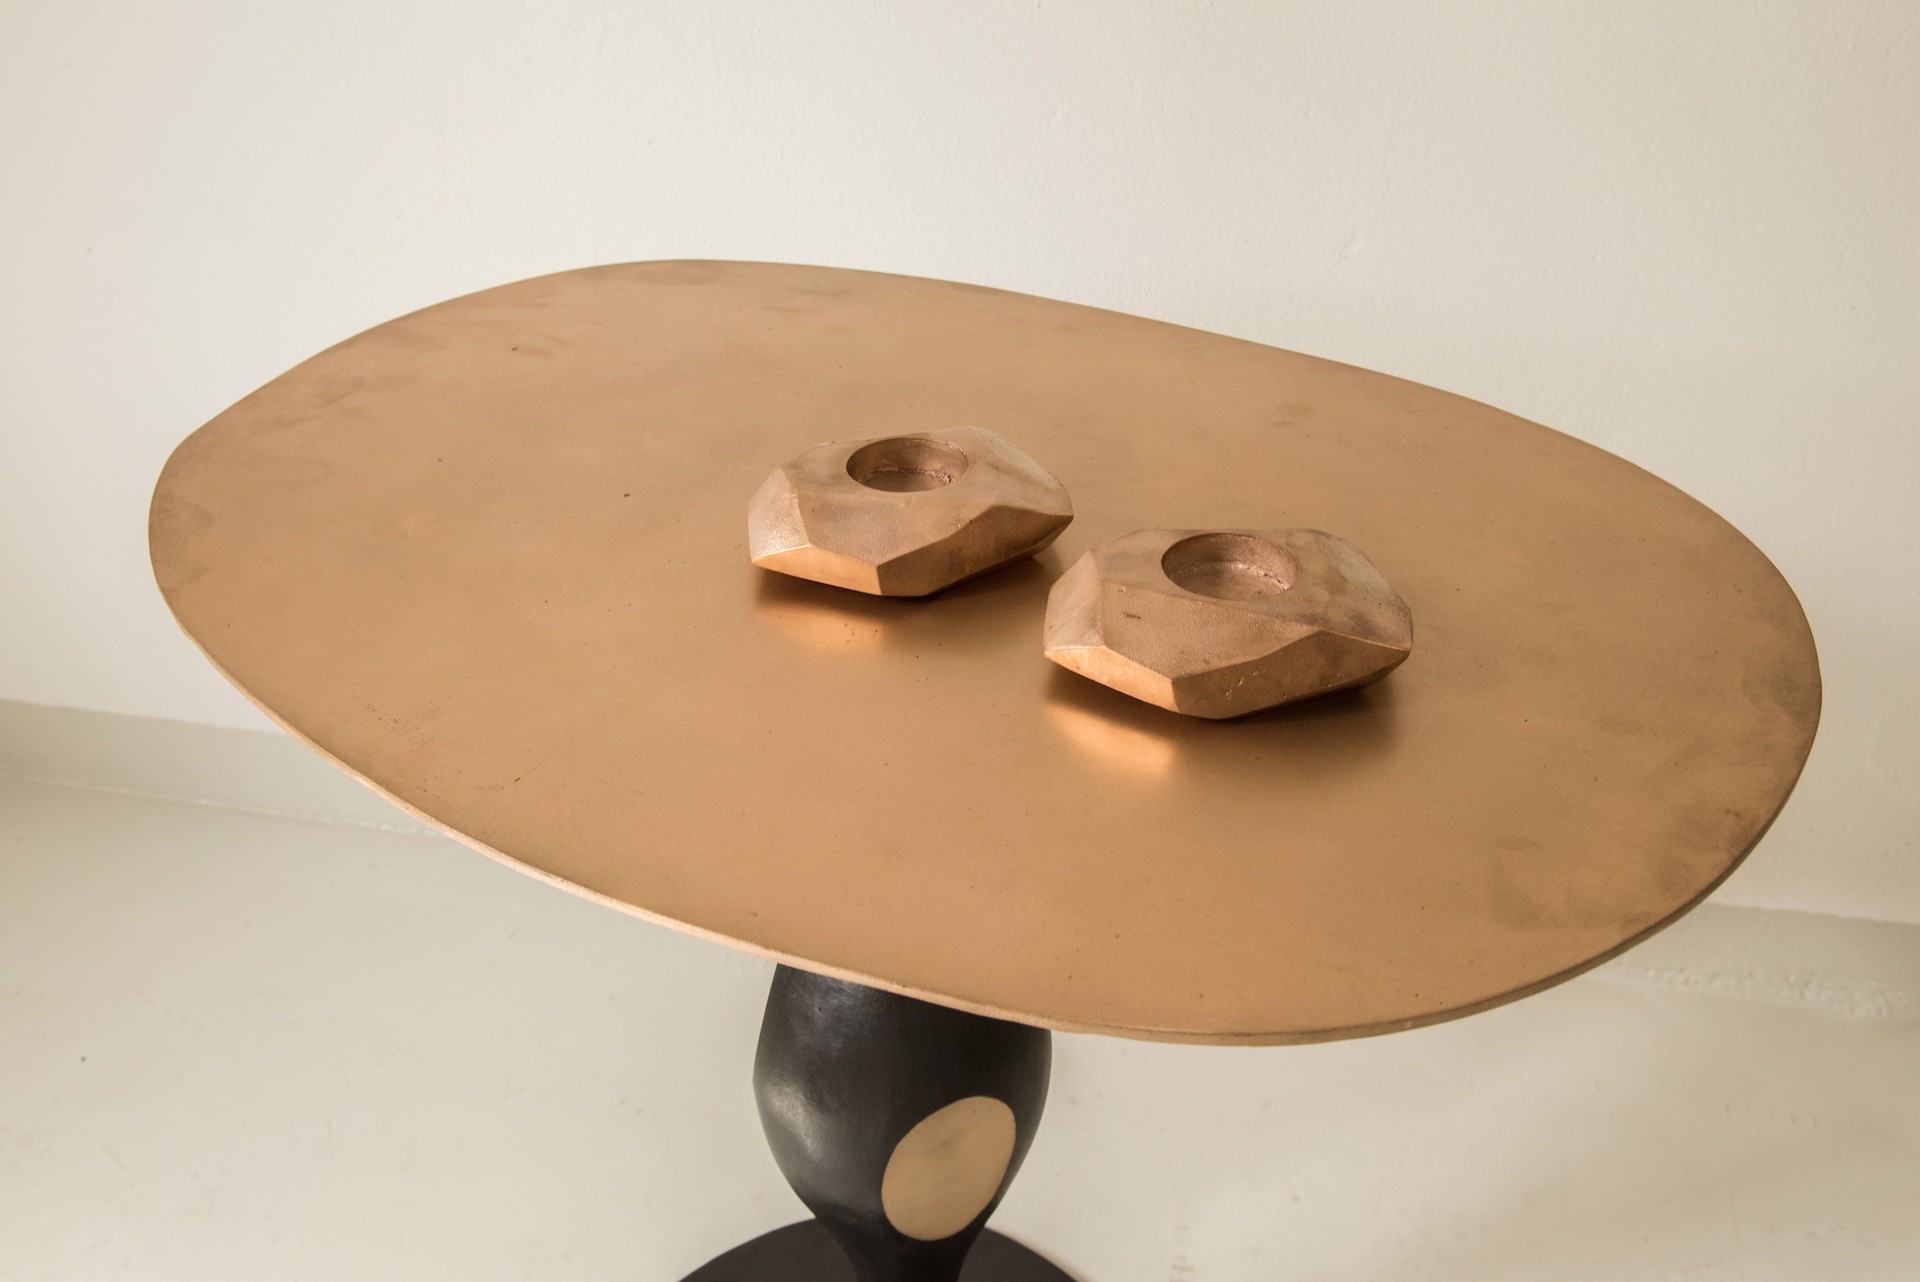 "Nazca" Candle holders by Jacques Jarrige